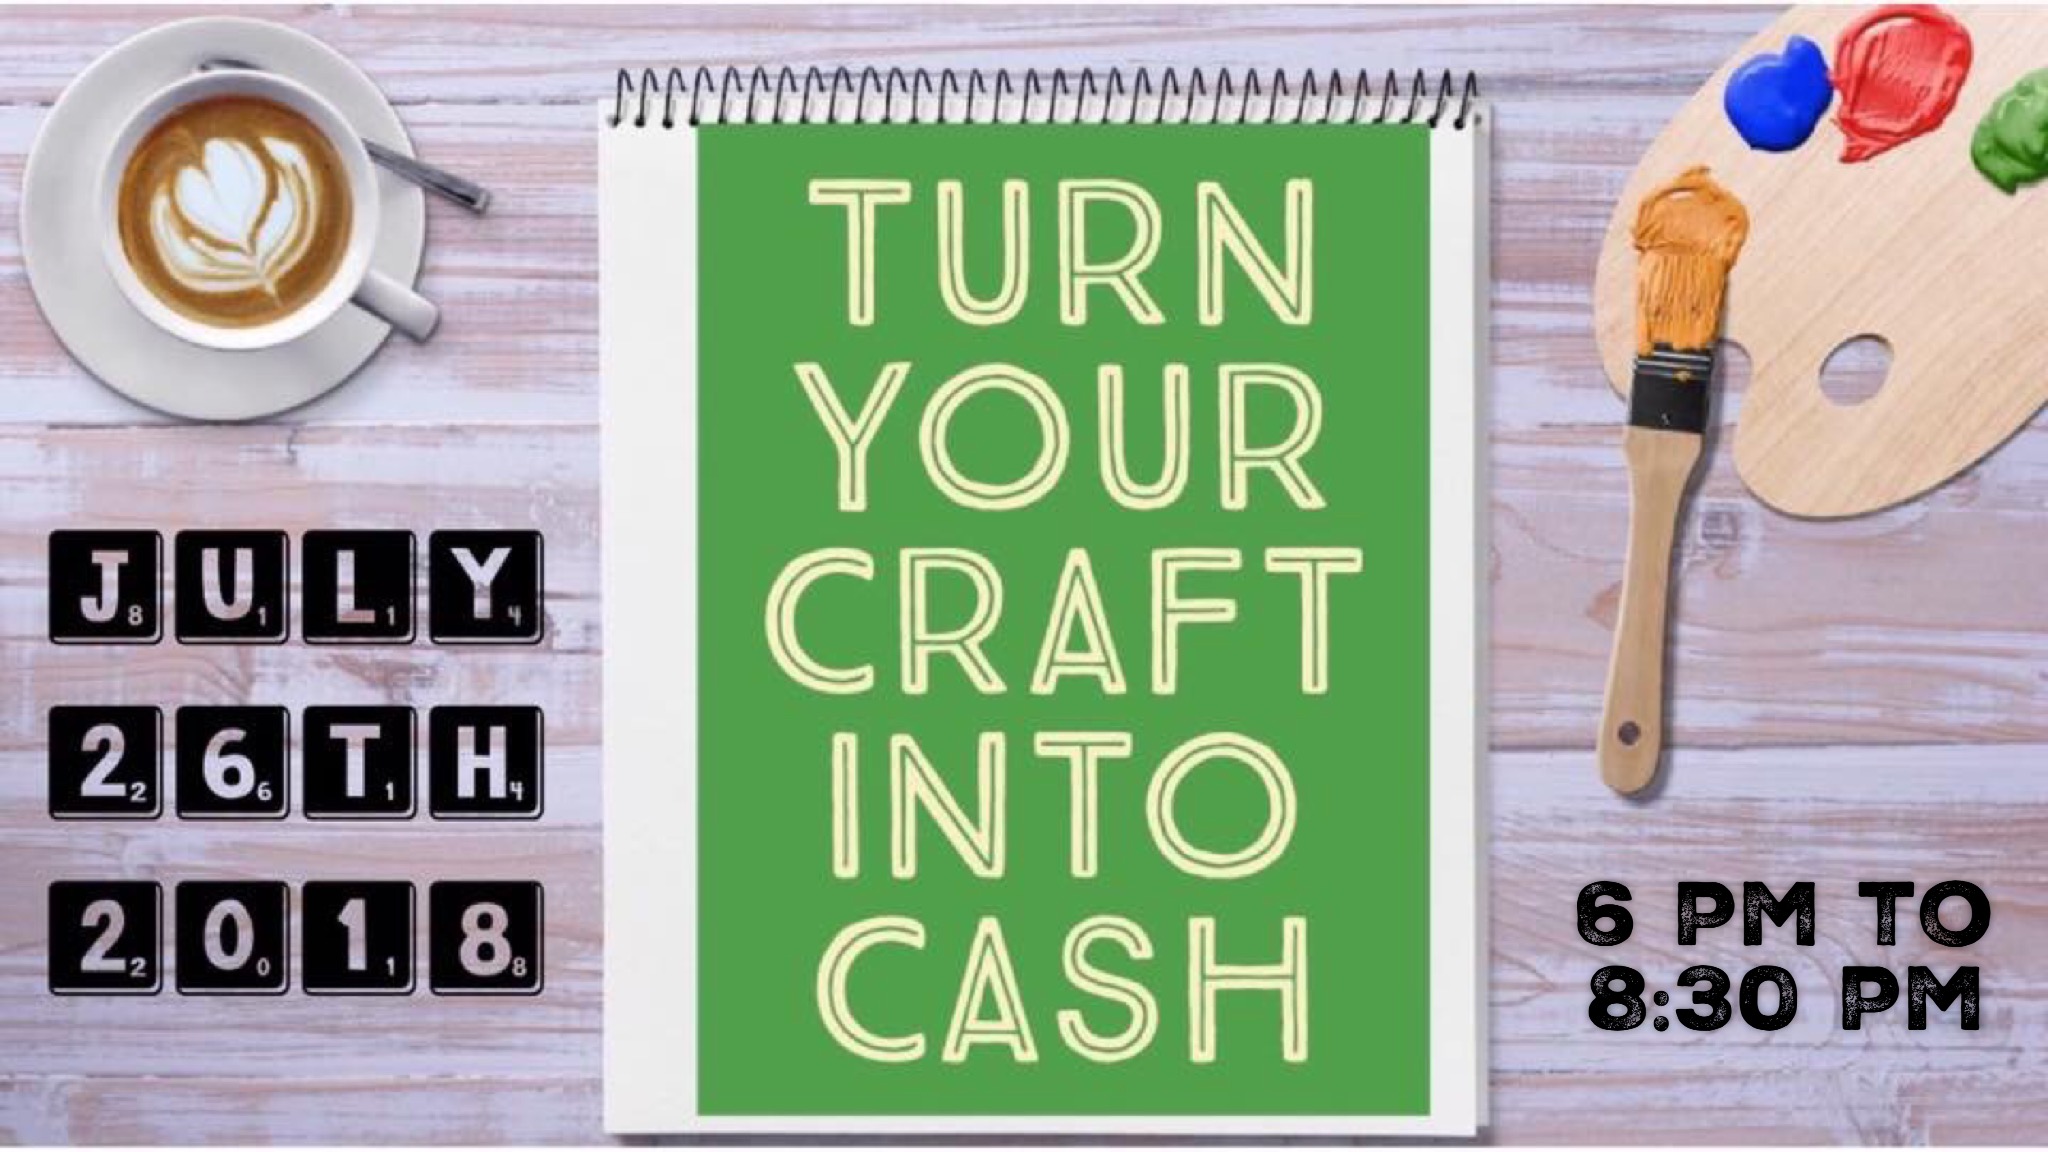 Turn Your Craft Into Cash - Business Startup Workshop in Tampa - Summer Event